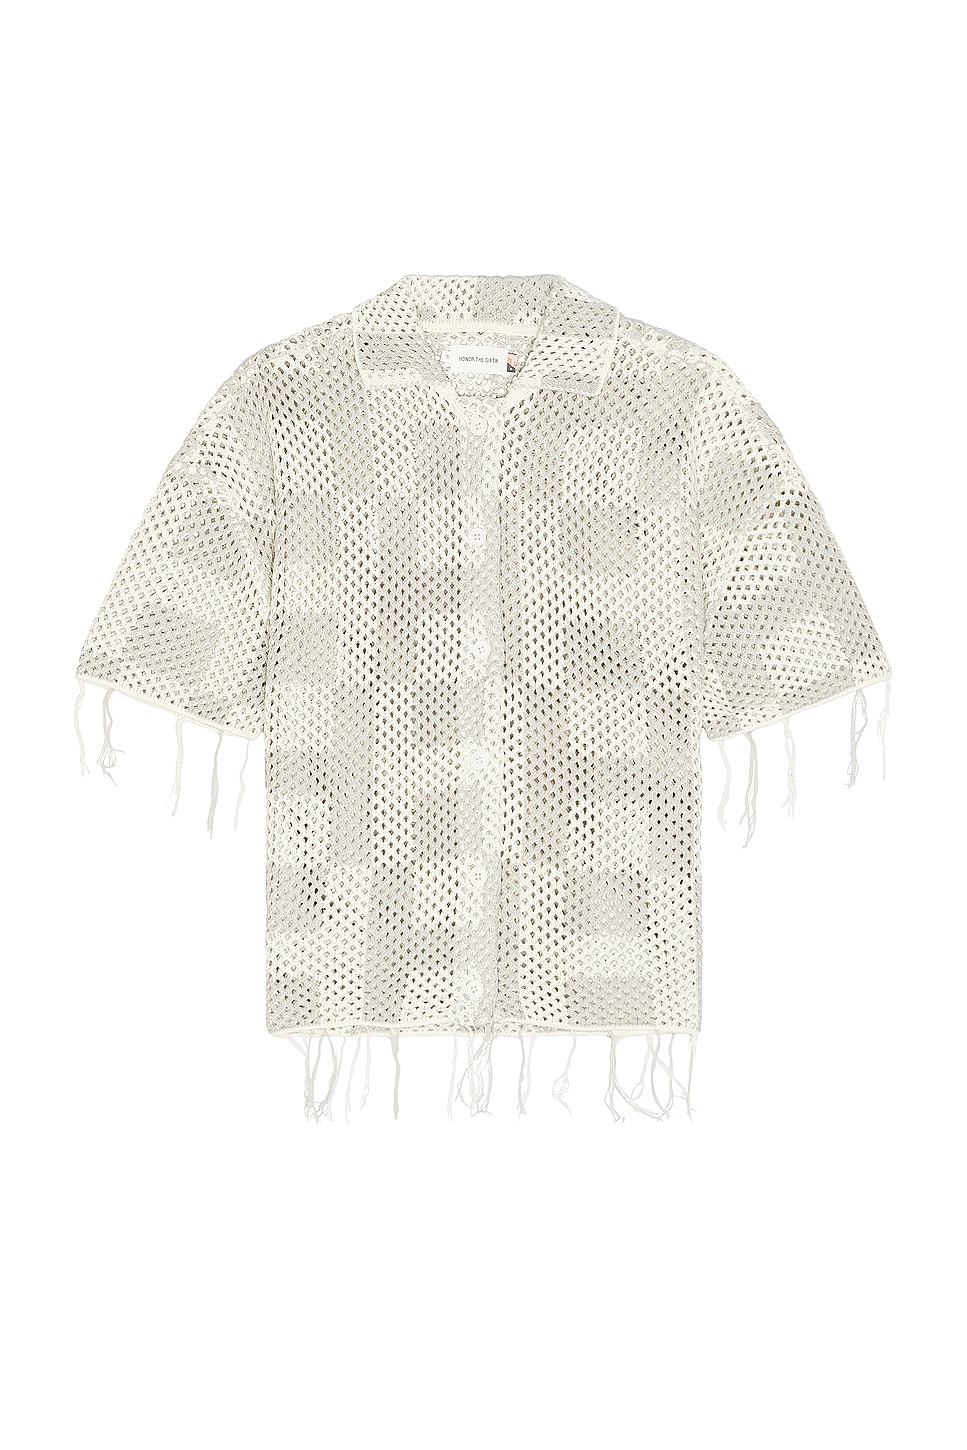 Image 1 of Honor The Gift A-spring Unisex Crochet Button Down Shirt in Stone